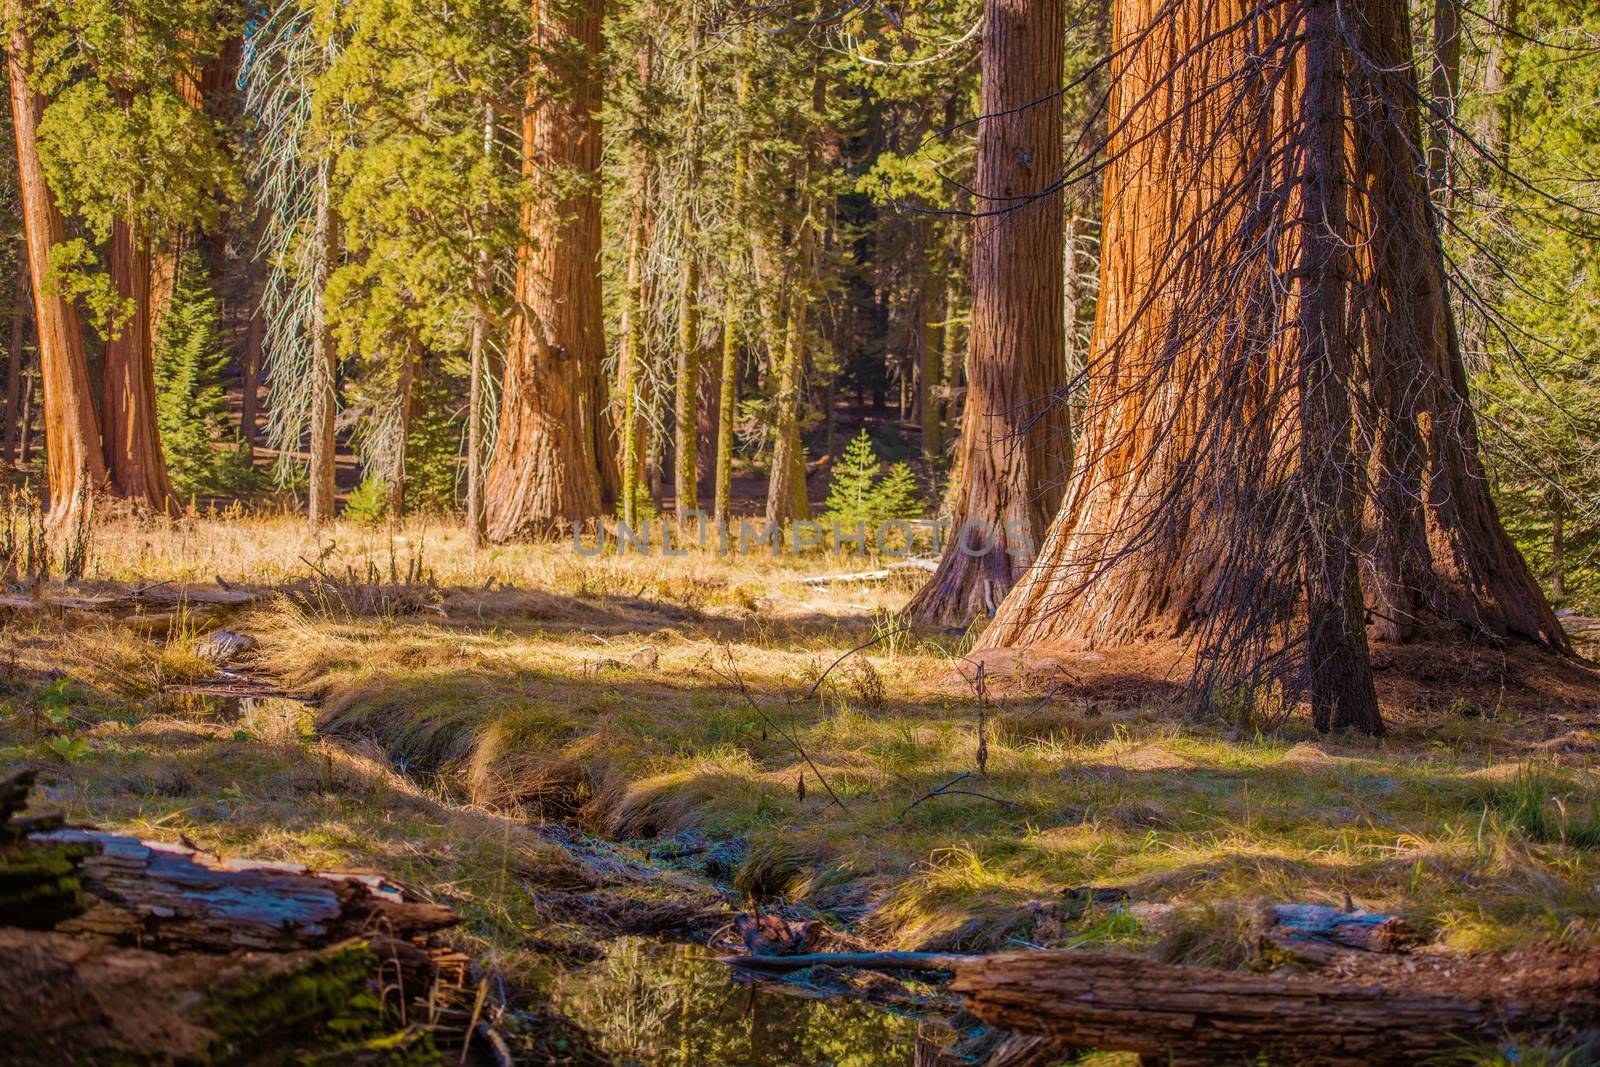 The Giant Sequoias Place by welcomia